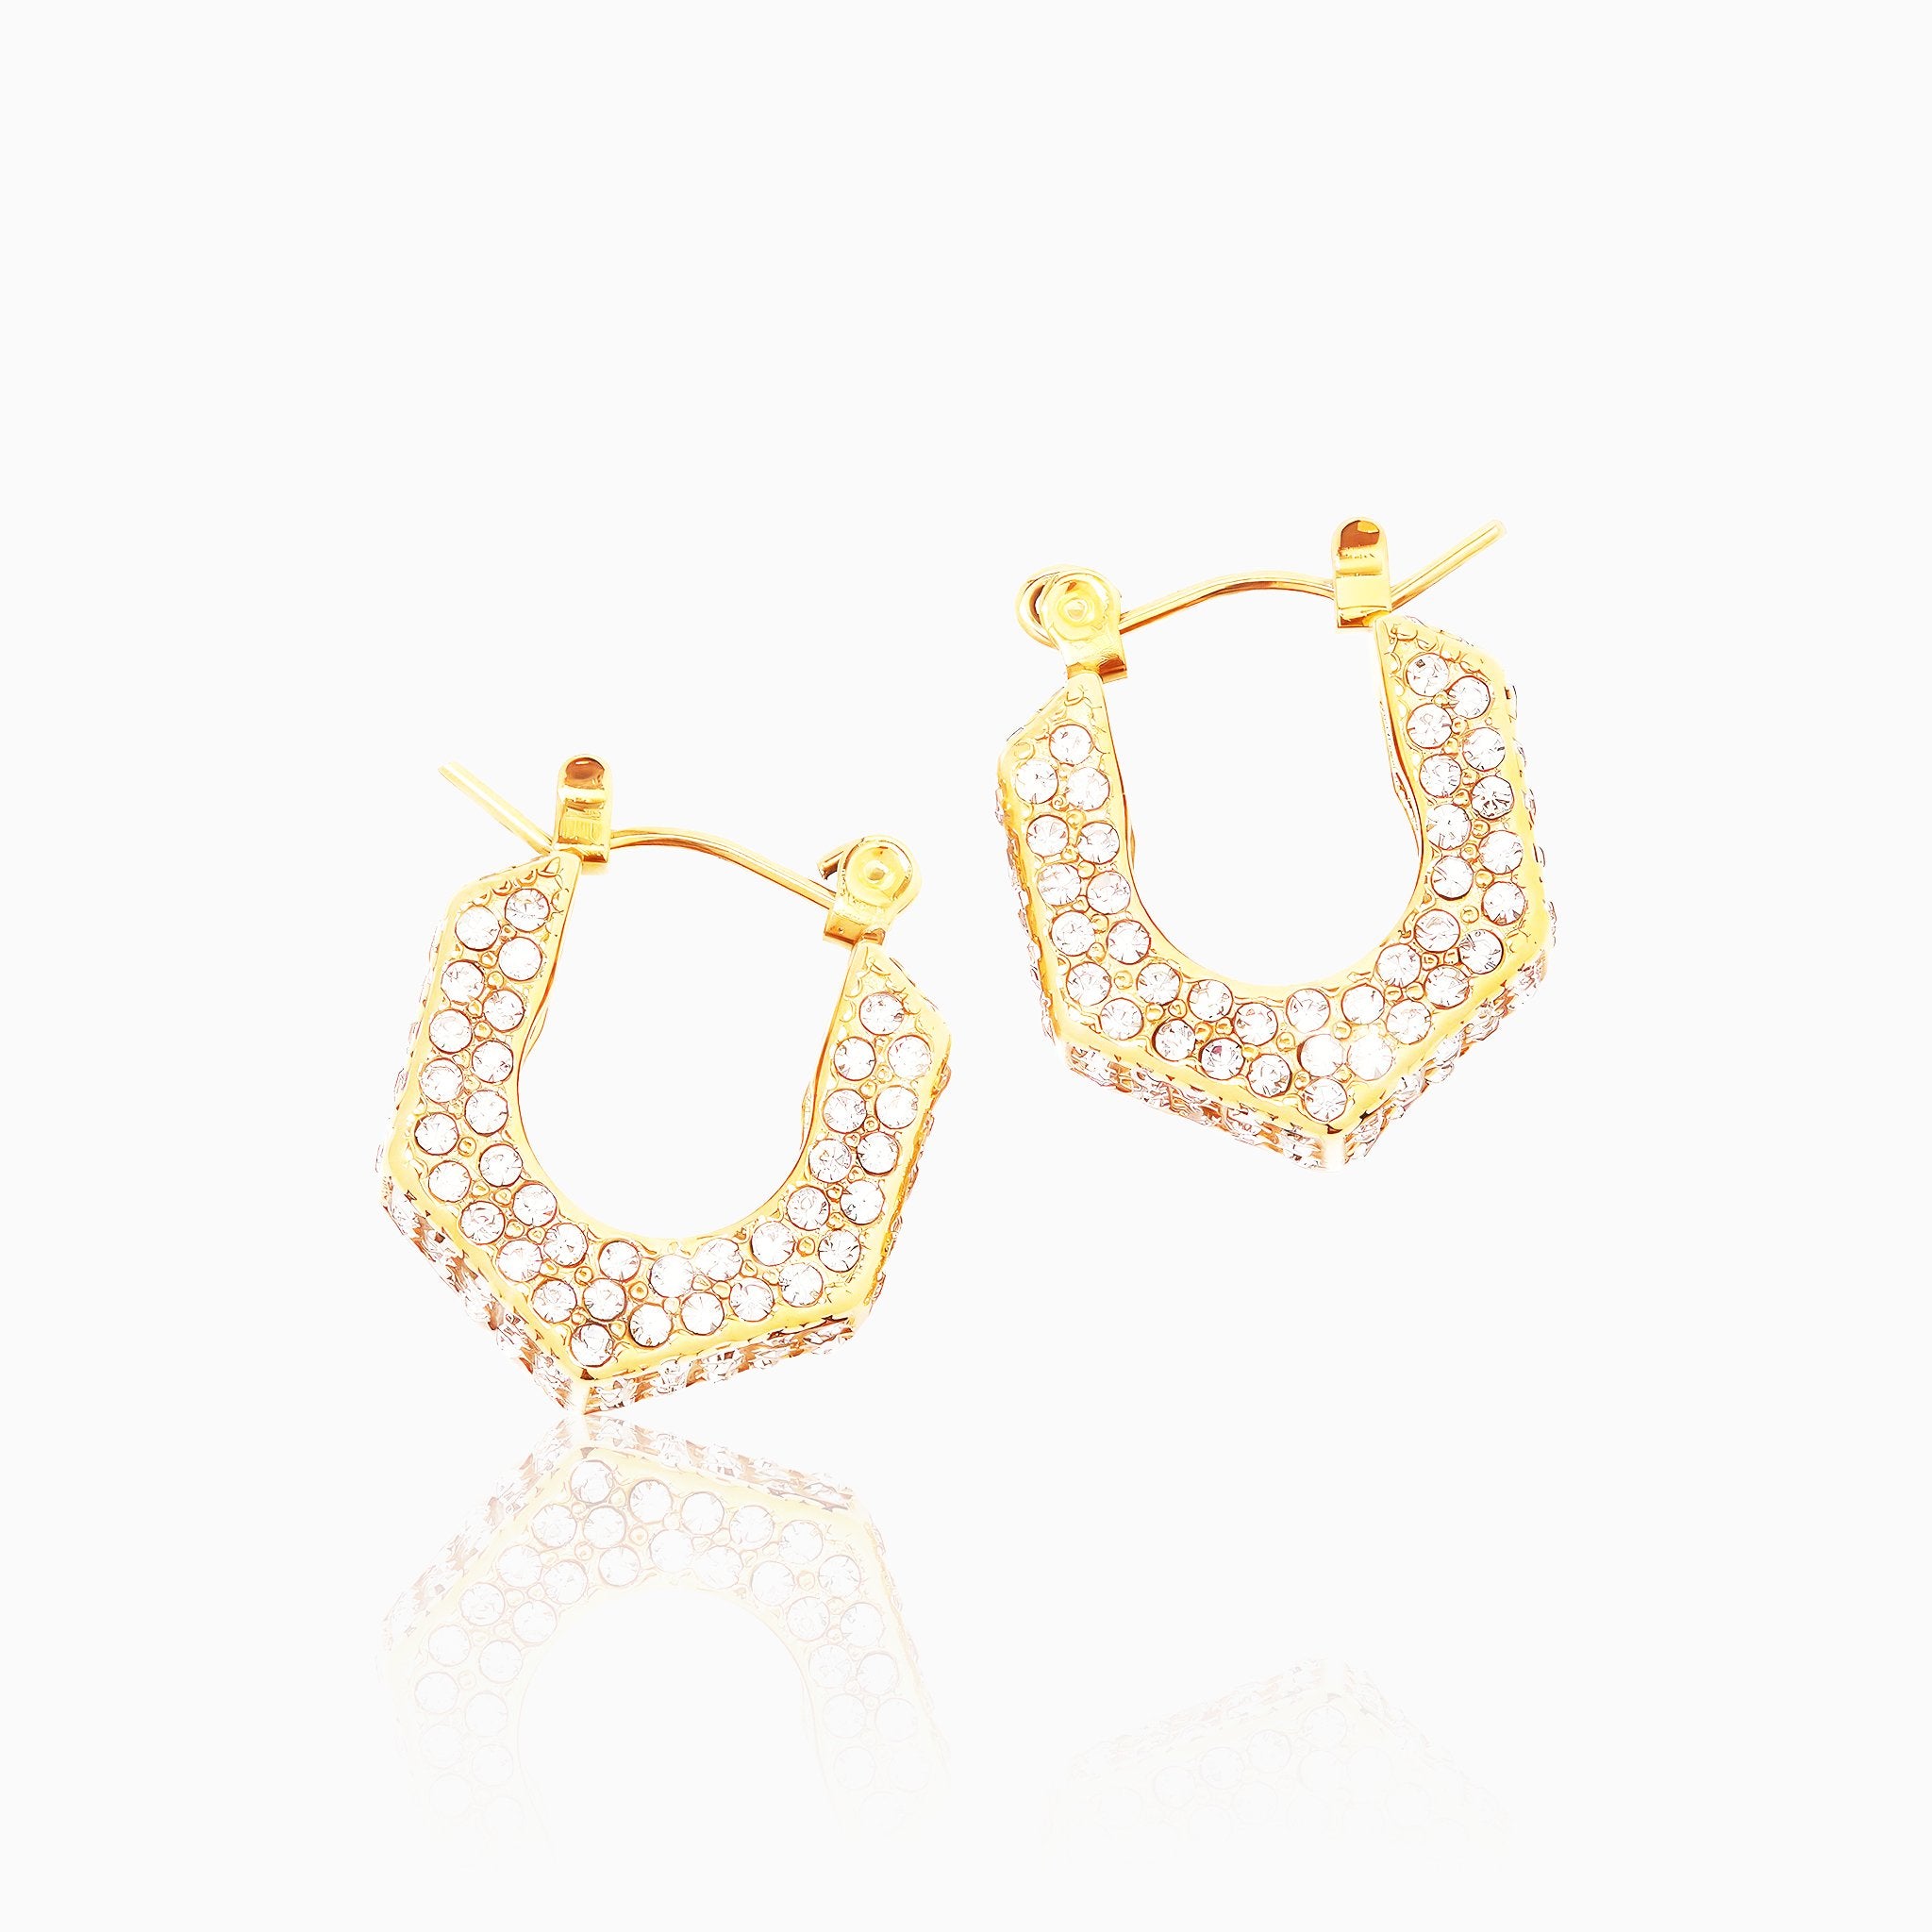 U-Earrings with Inlaid White Gemstones - Nobbier - Earrings - 18K Gold And Titanium PVD Coated Jewelry